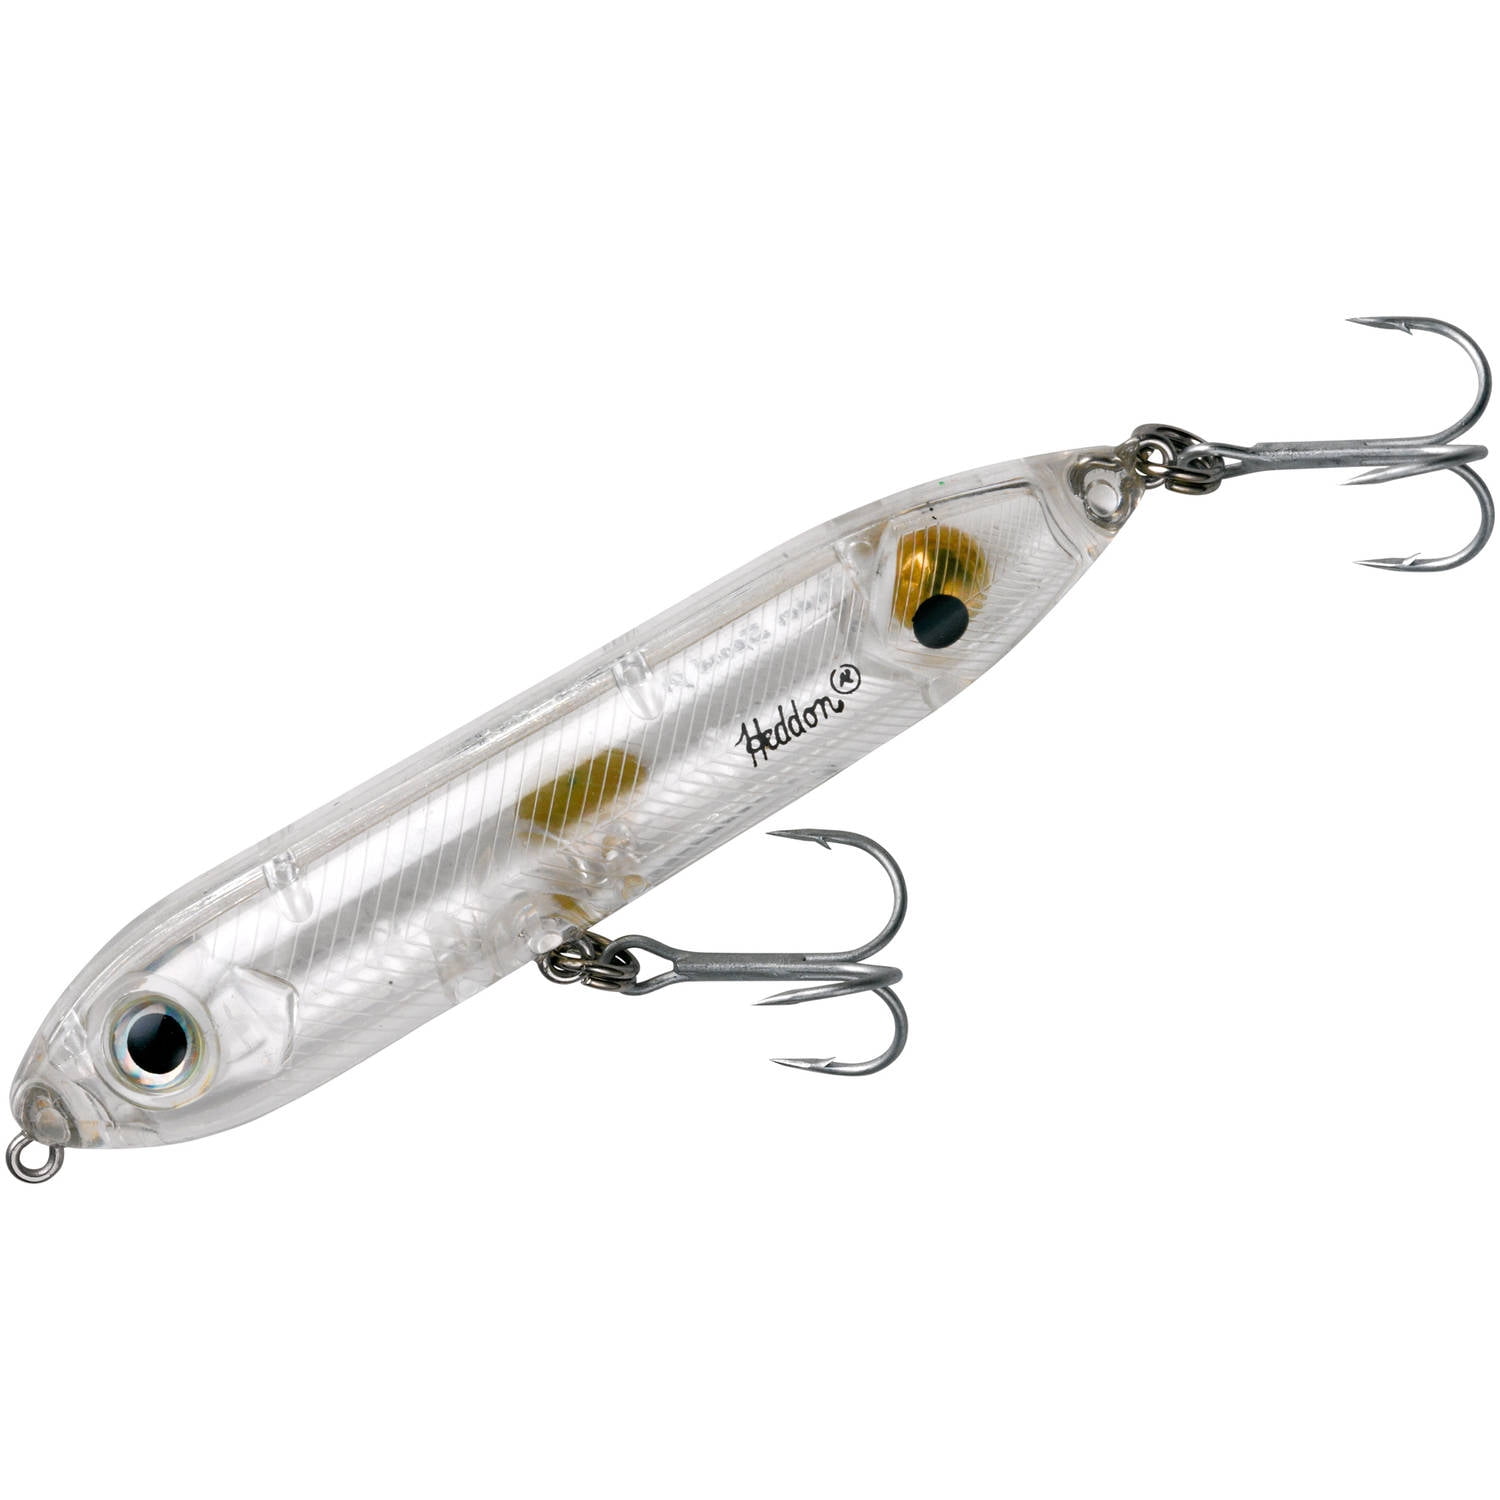 1 Next Level Lures Spook PEARL/REDHEAD COLOR 3.3 oz. 6 3/8 FREE